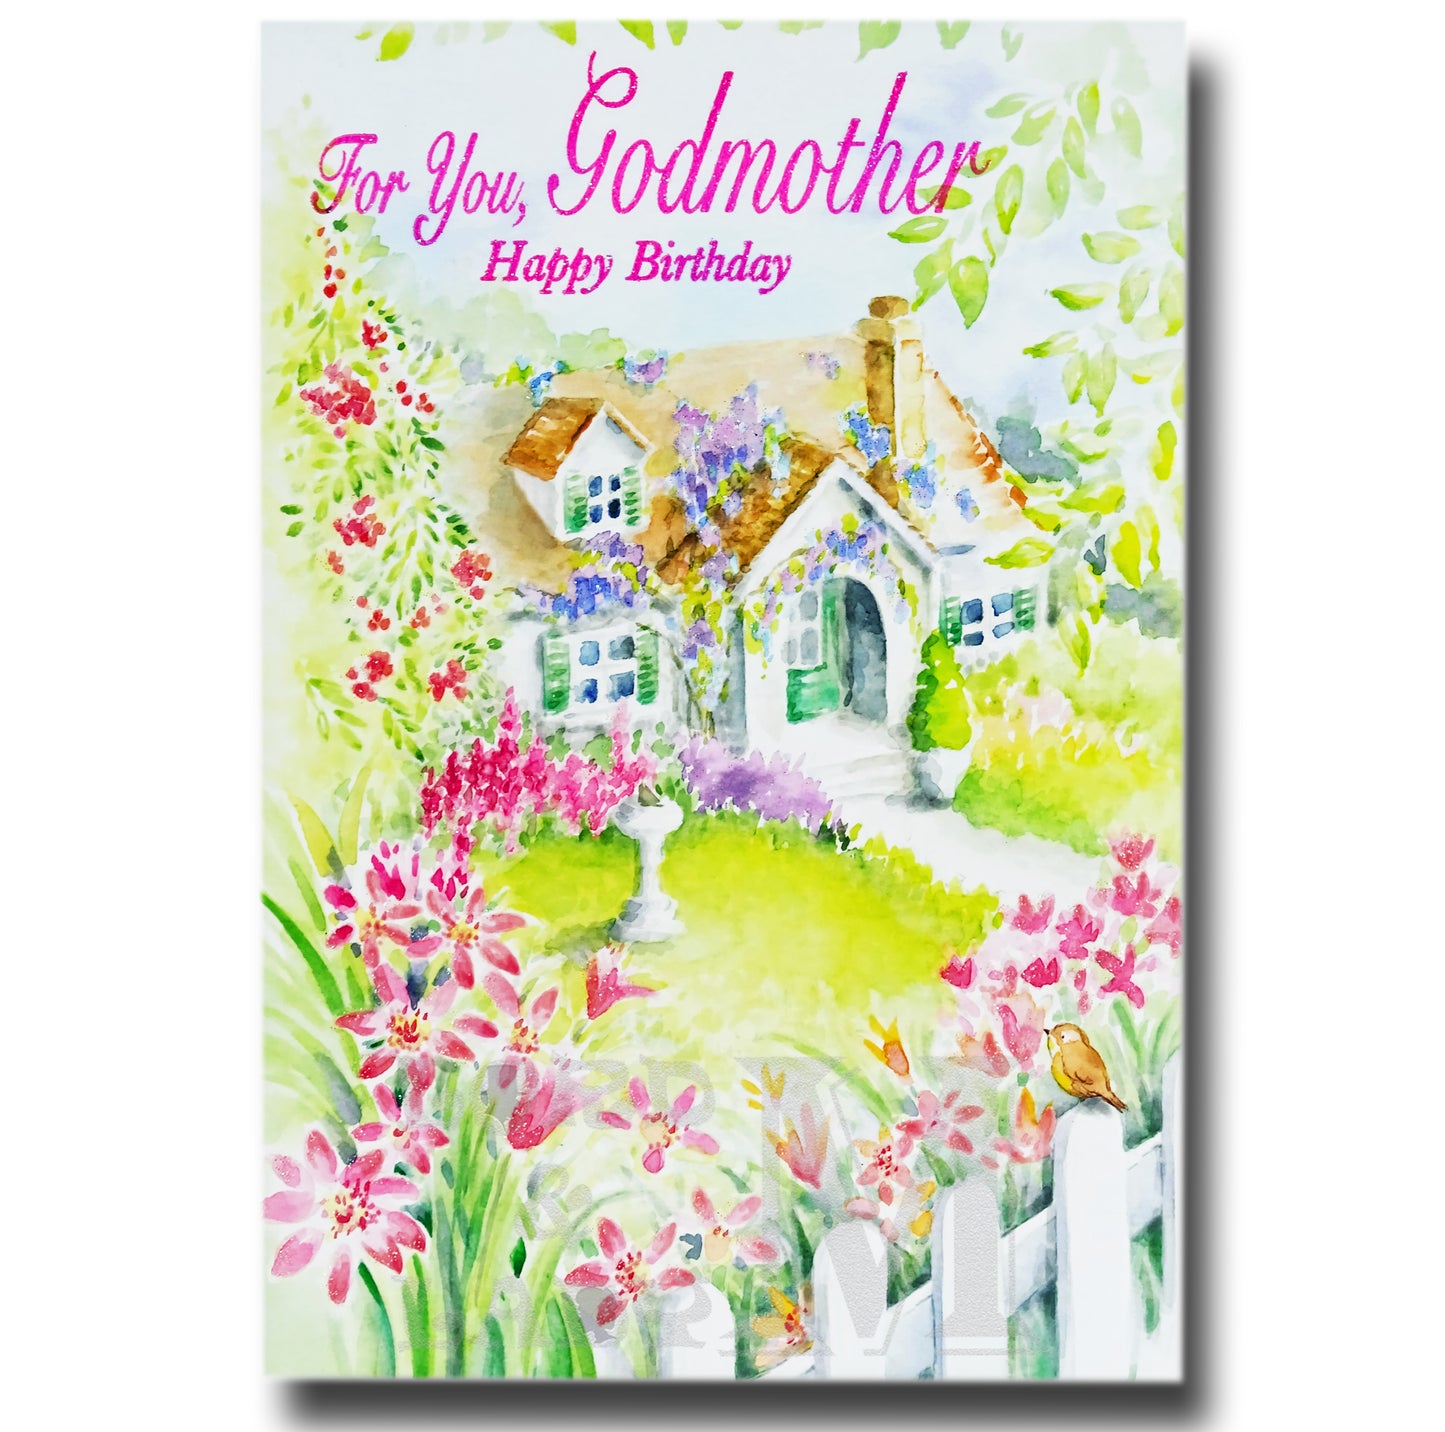 19cm - For You, Godmother - House Green Door - E